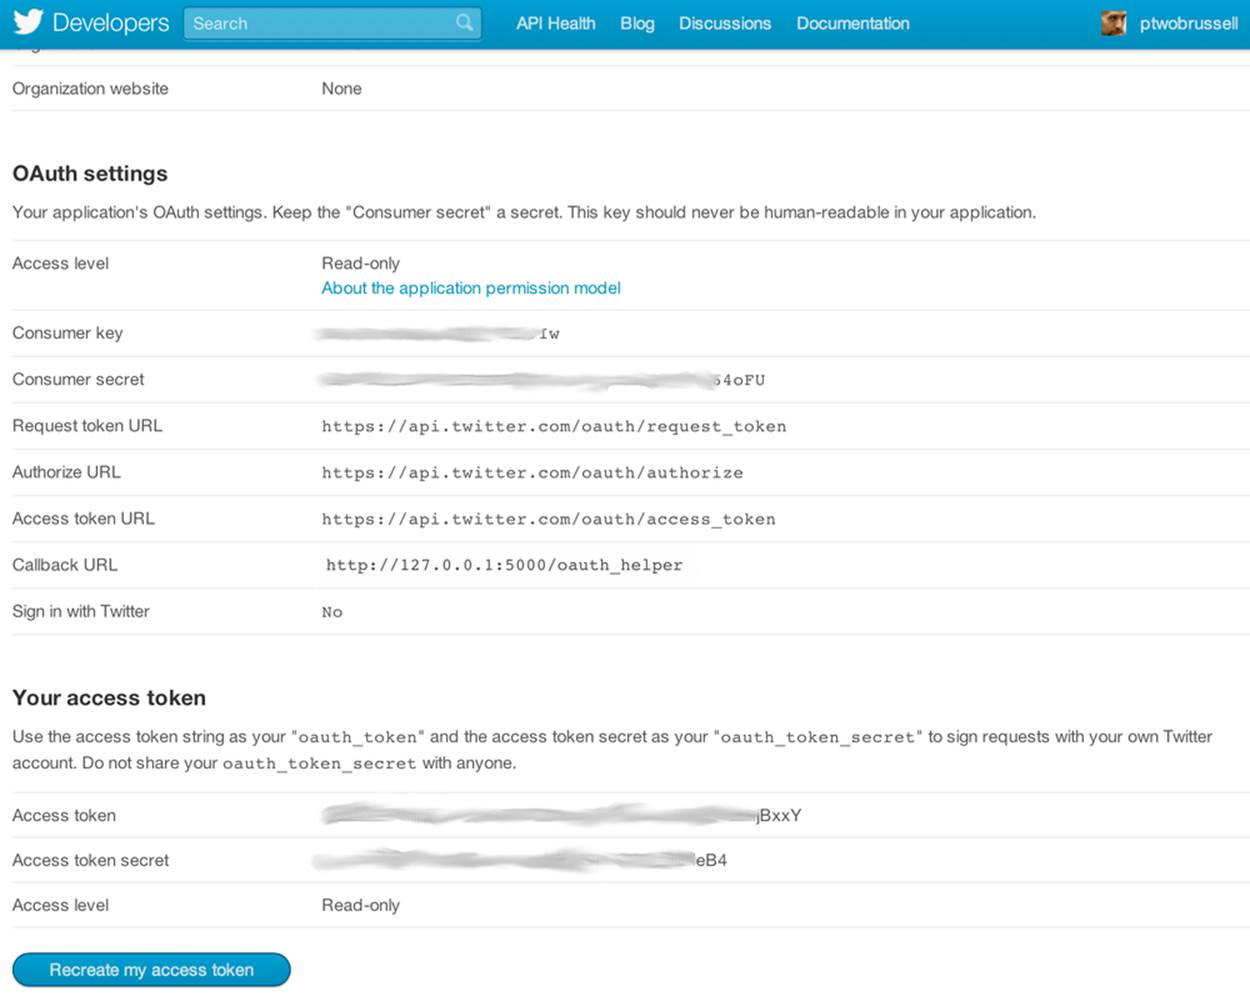 Sample OAuth settings for a Twitter application